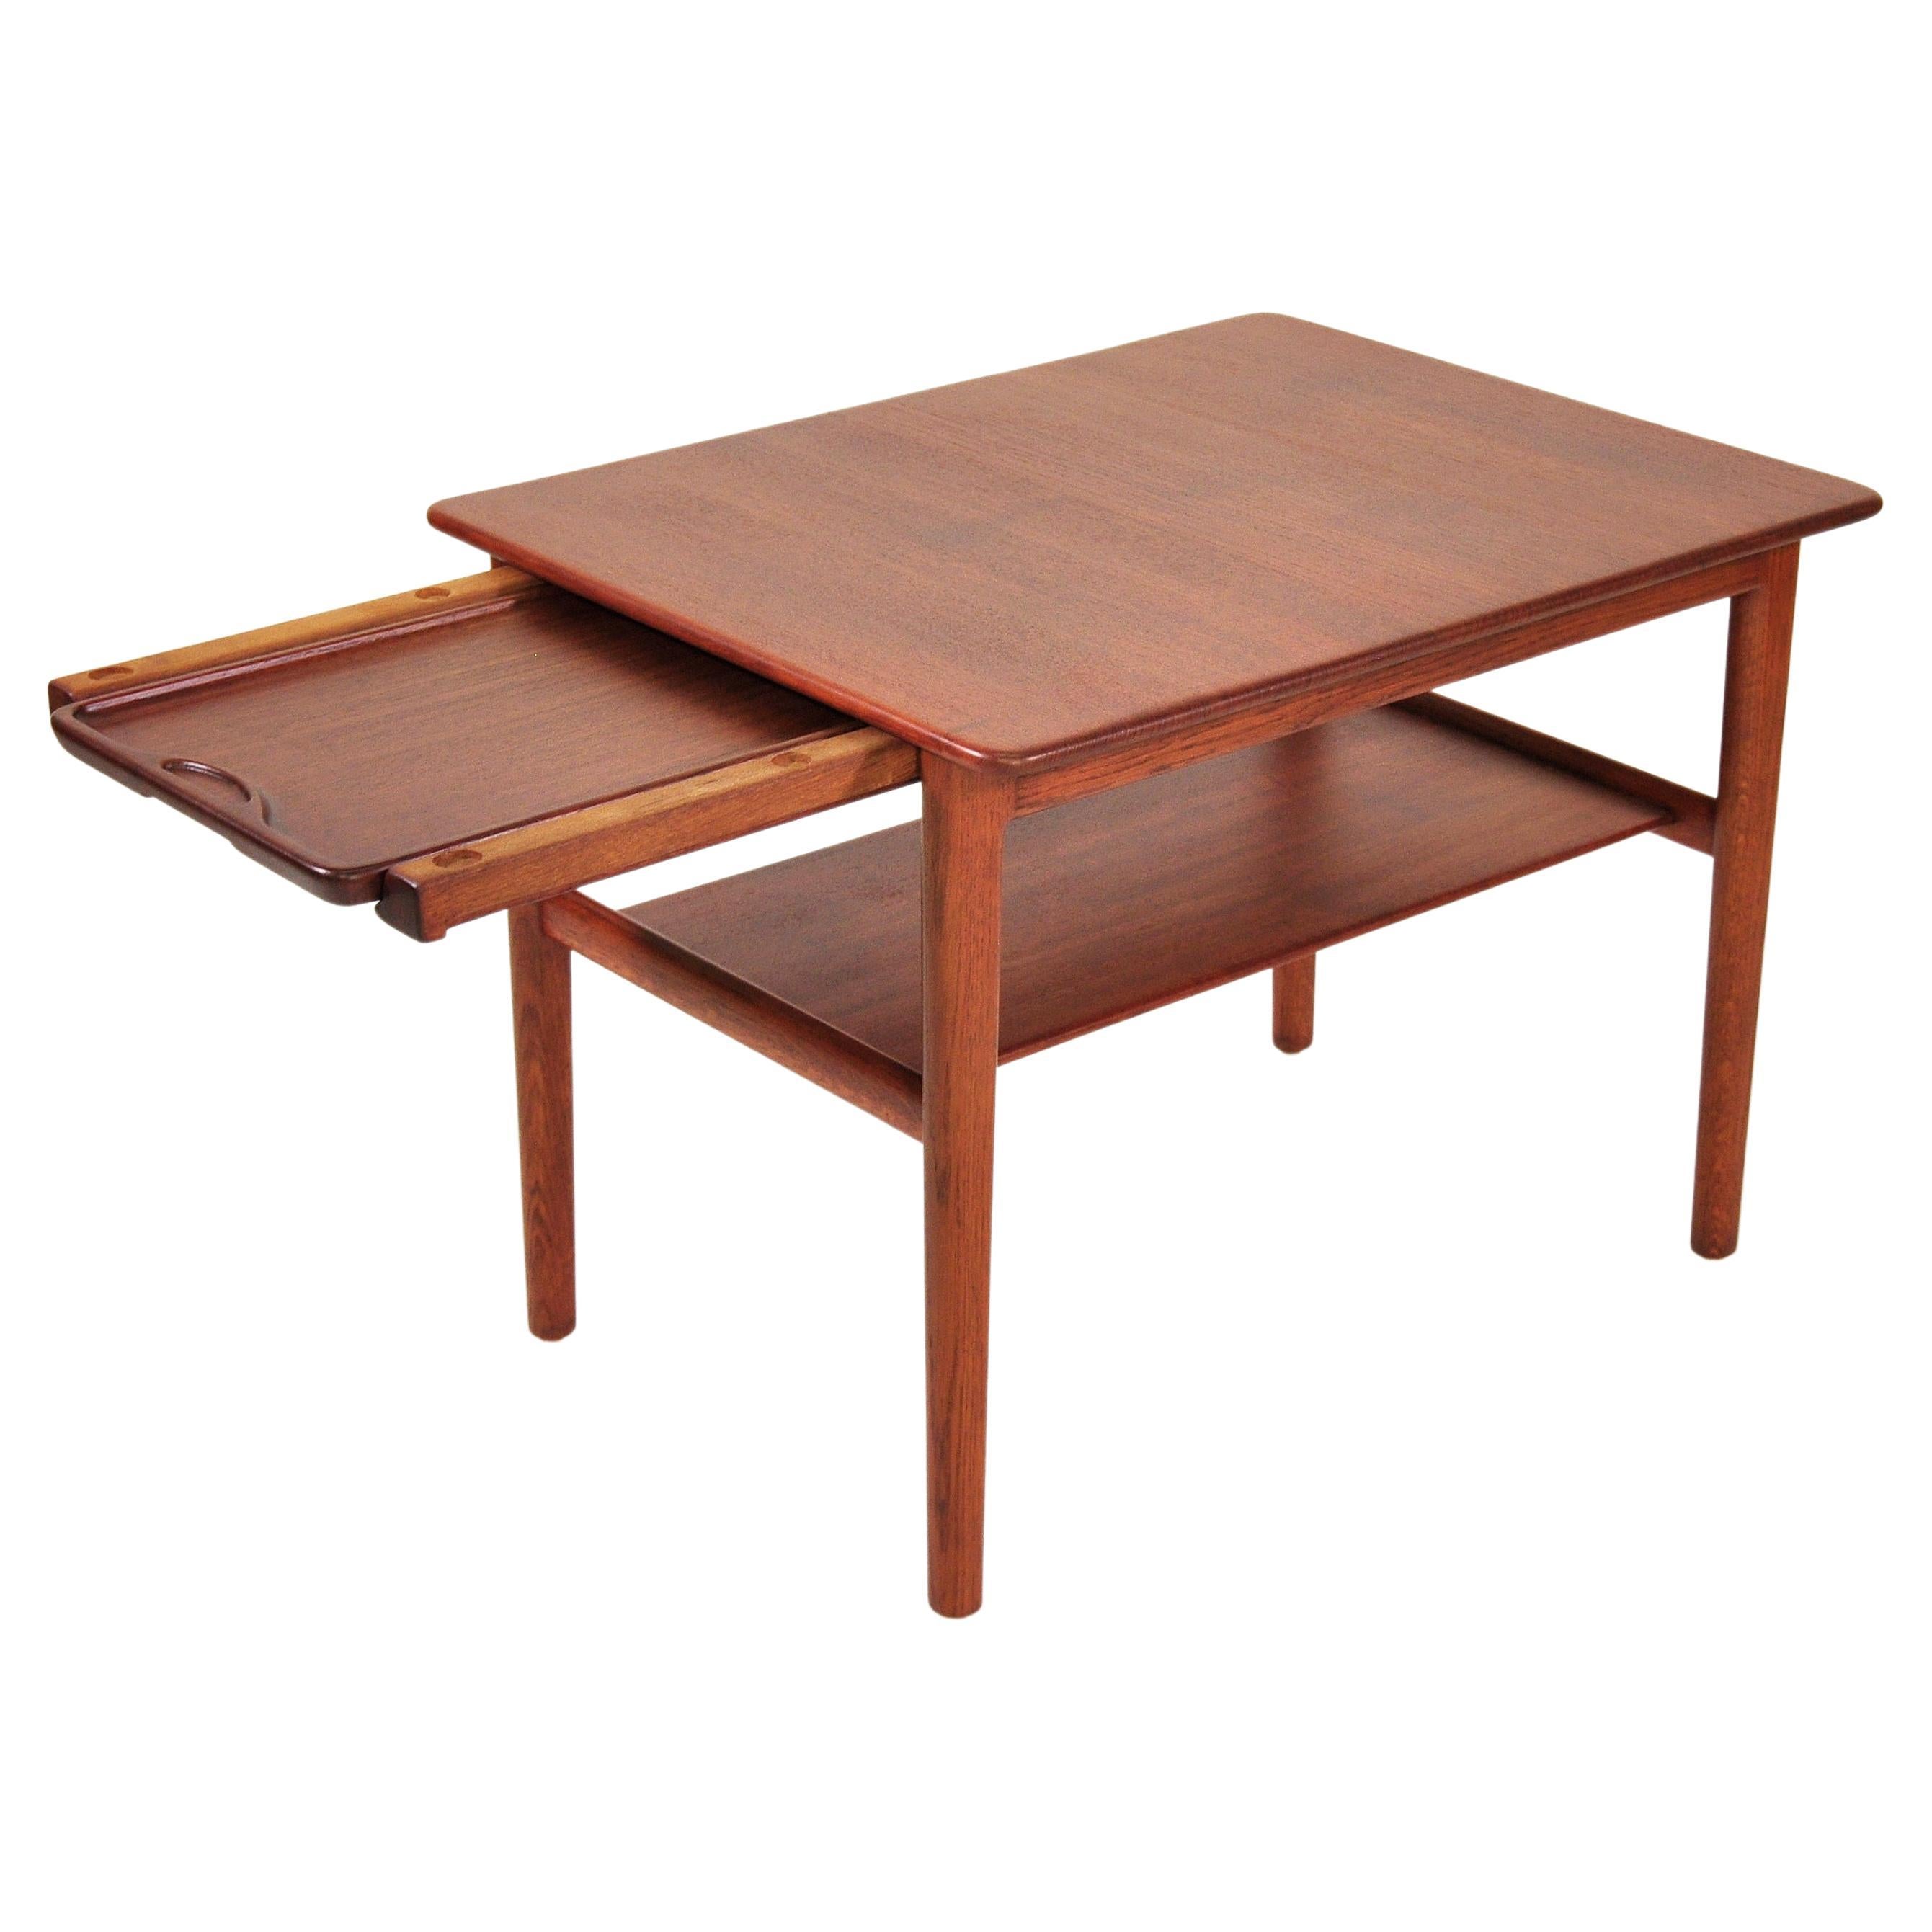 A very rare two-tier teak and oak occasional table with hidden tray, designed by Hans Wegner for Johannes Hansen. The end table features a two-tiered design with a solid teak top and shelf, oak legs and spanners, and a pull-out serving teak tray.